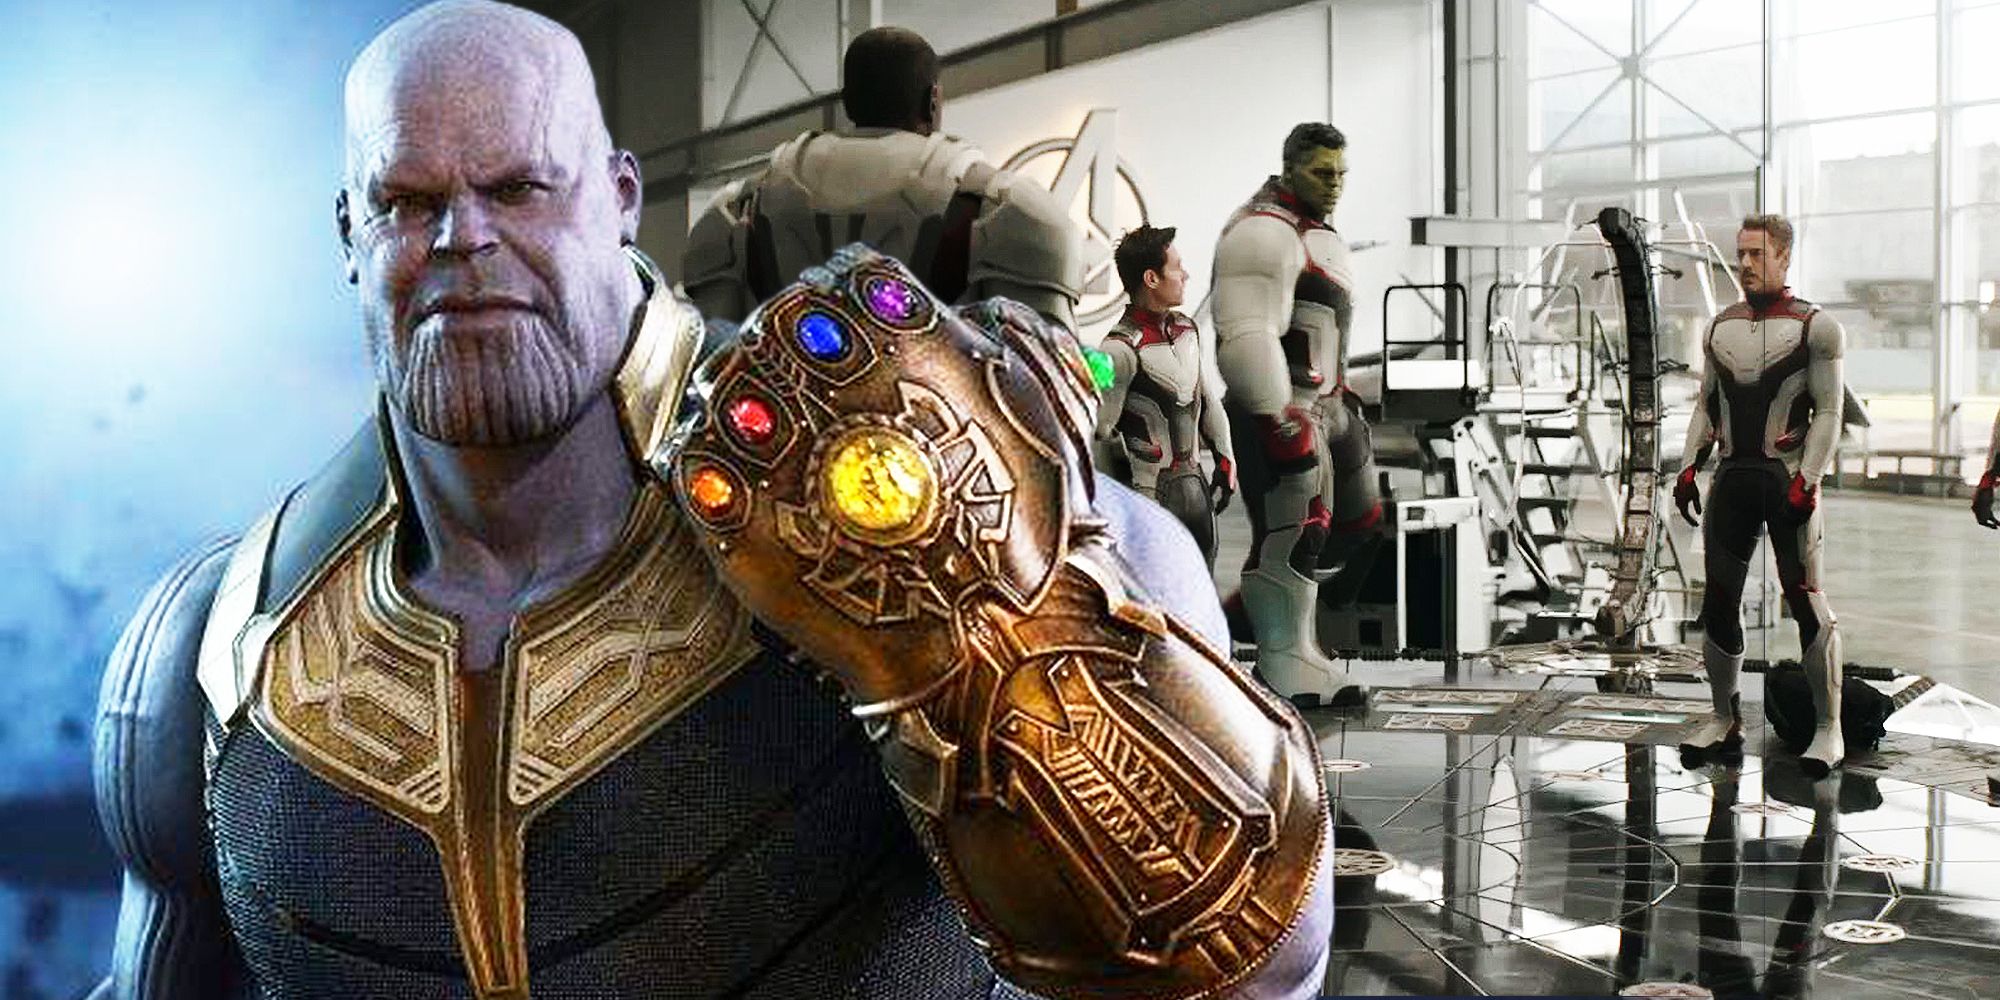 Thanos and the Infinity Gauntlet after the Avengers Endgame Time Heist